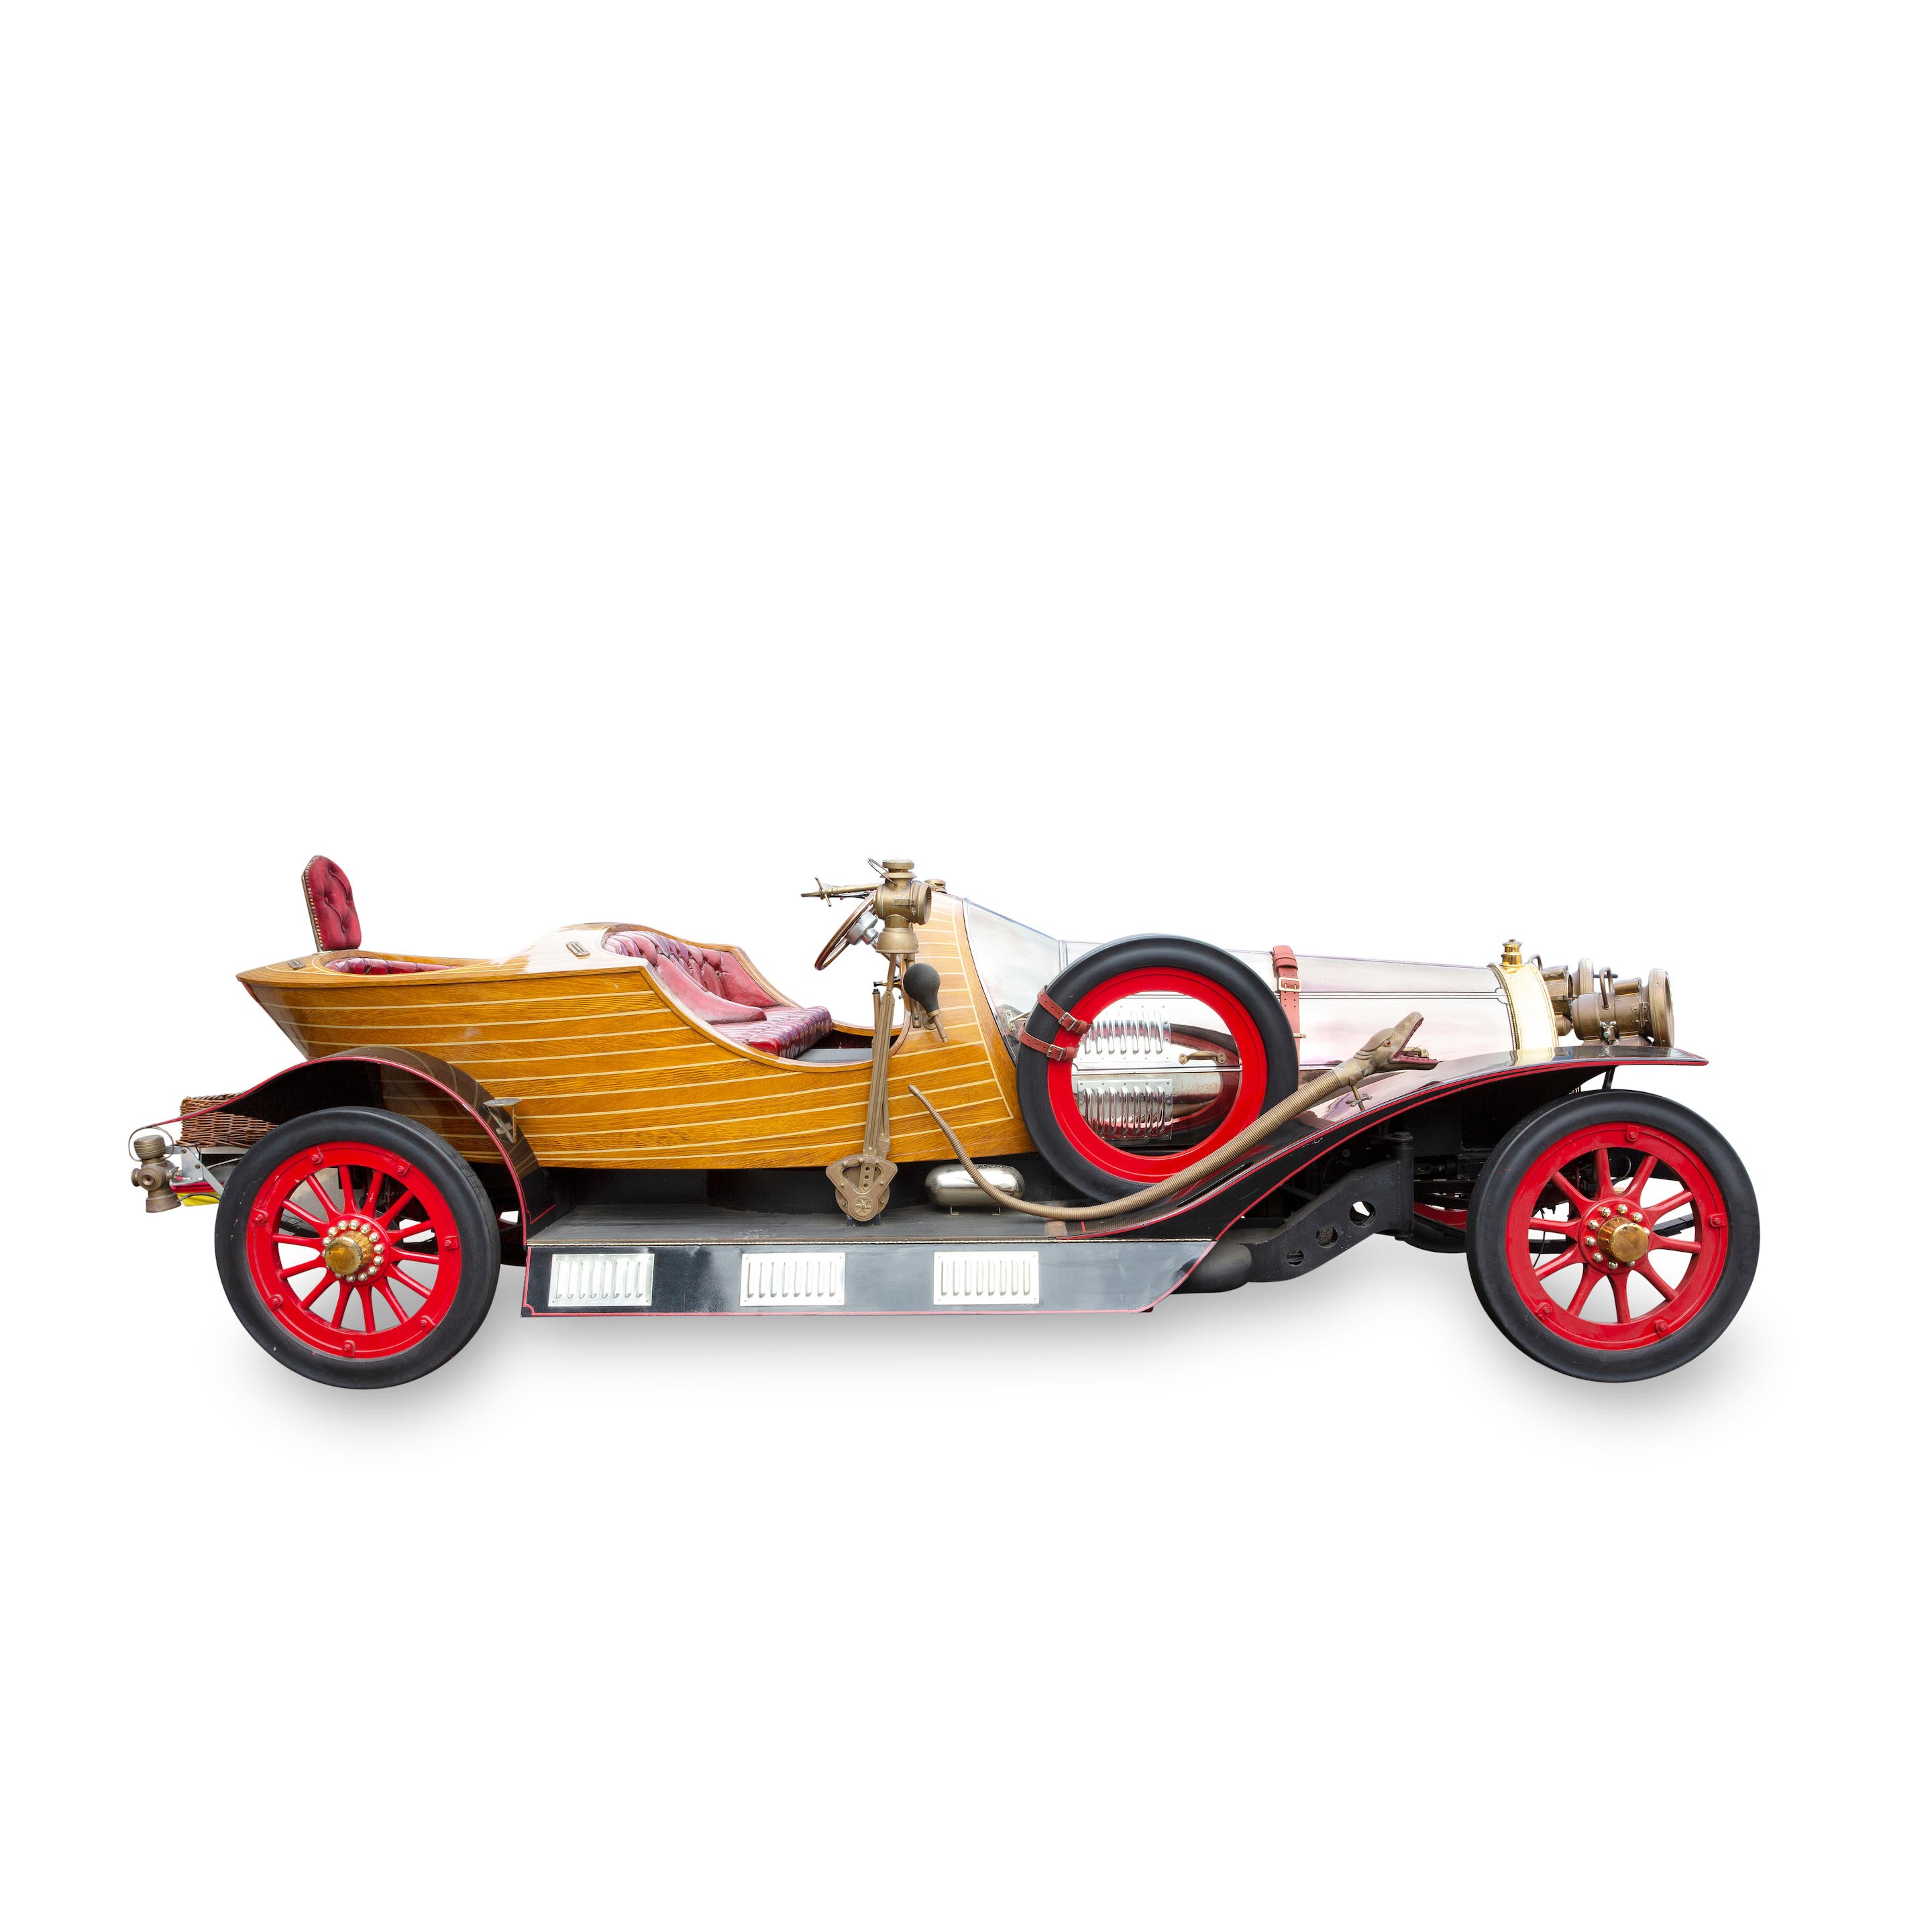 All 100+ Images where is the original chitty chitty bang bang car now Completed